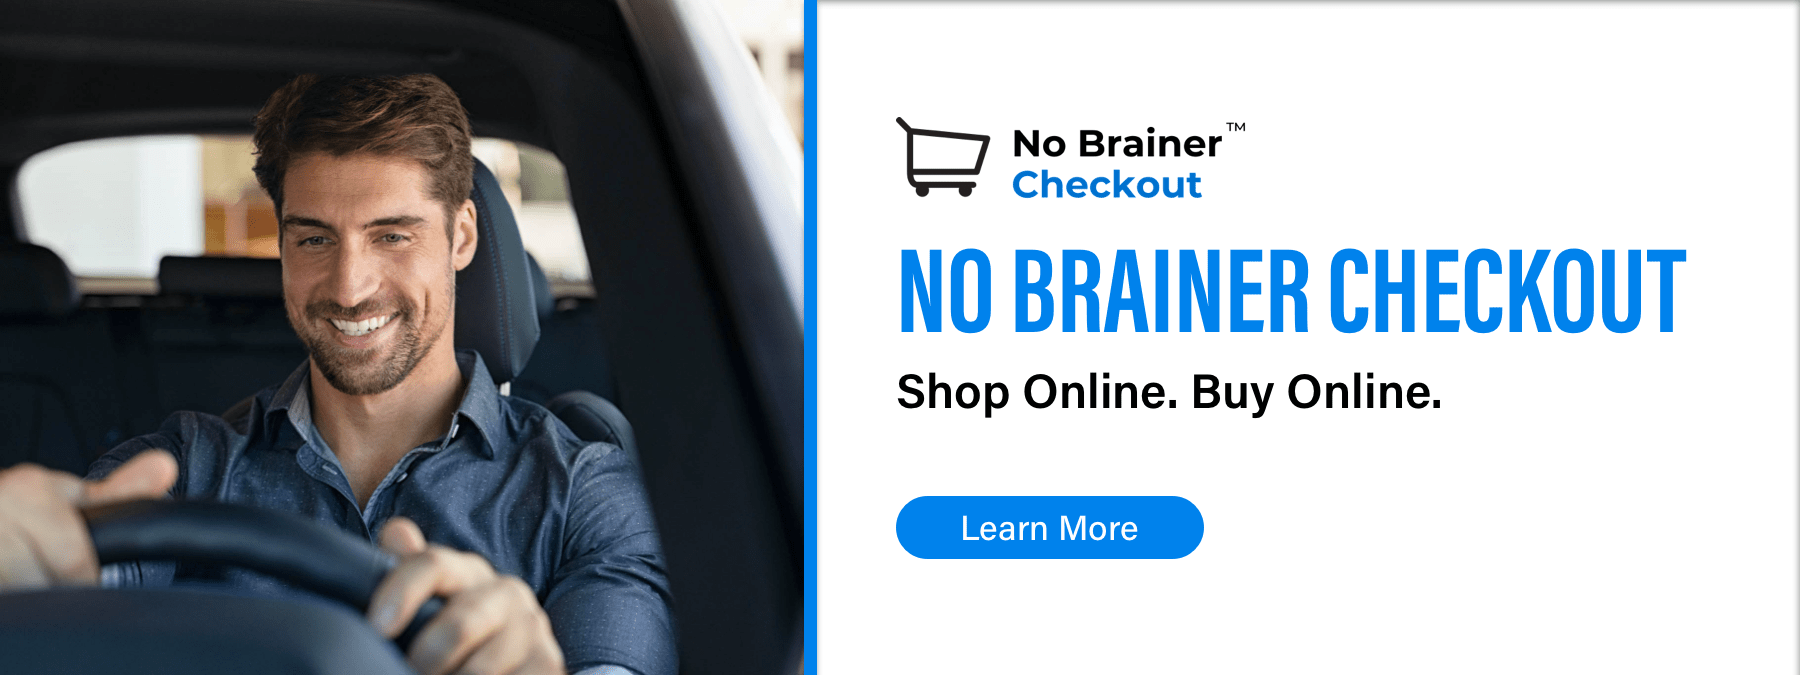 No Brainer Checkout, Shop Online. Buy Online., Learn More